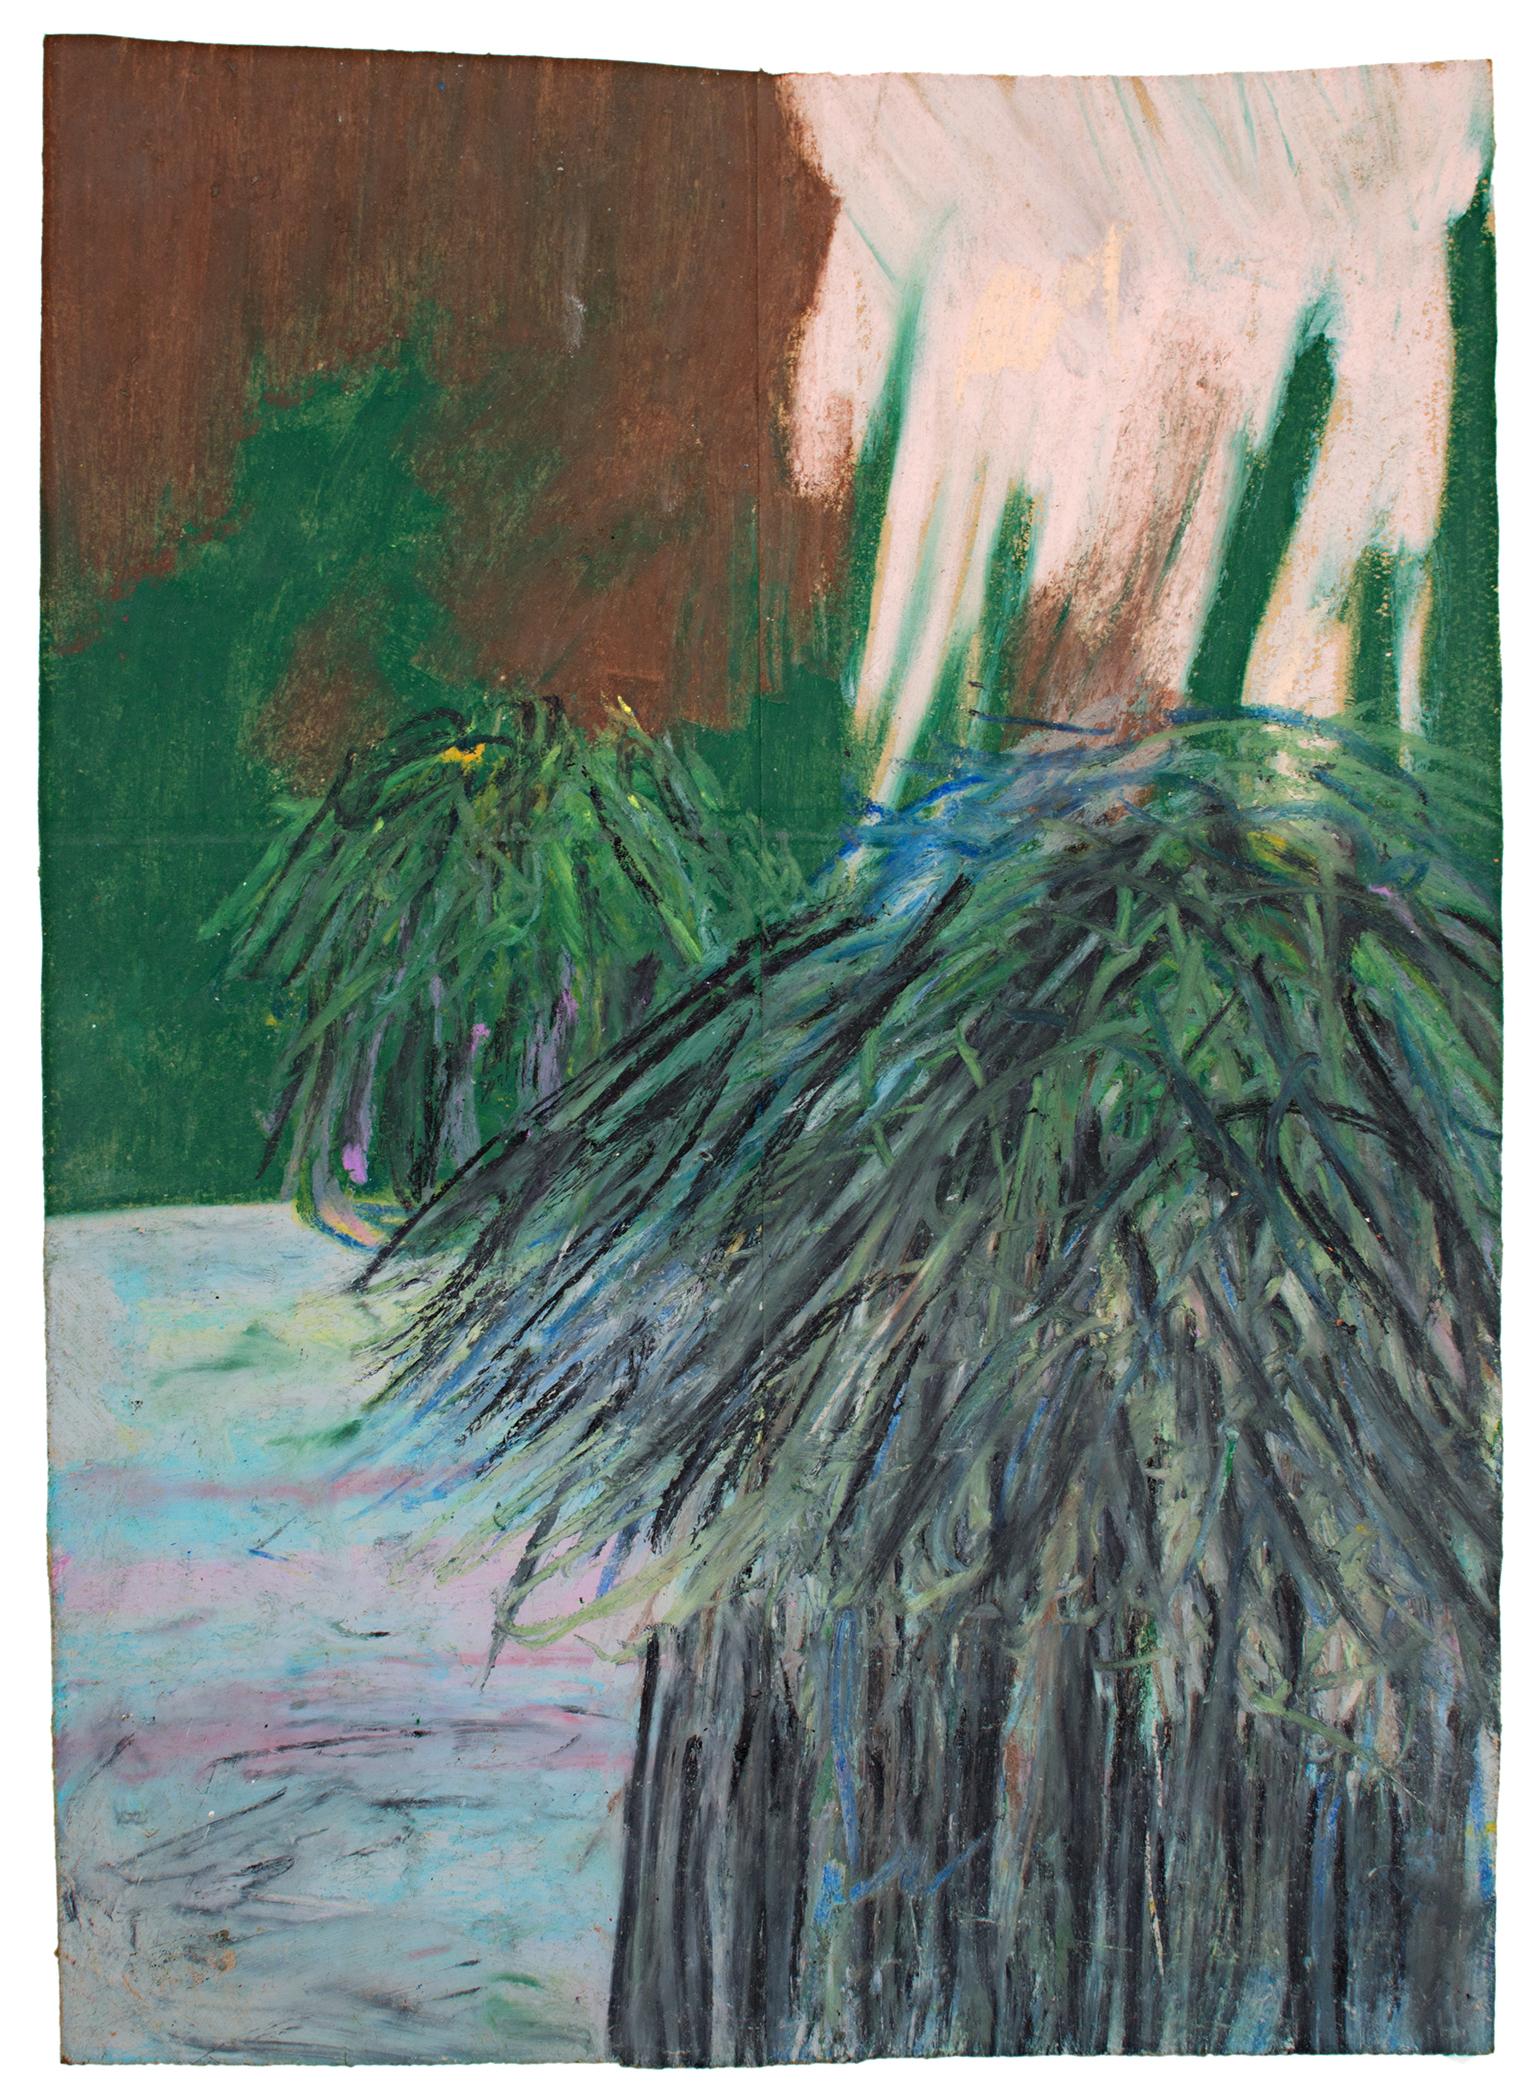 "Huts" is an original oil pastel drawing on a paper bag by Reginald K. Gee. The artist signed the piece on the back. It features two grass huts on a light blue ground. The background is brown, green, and peach and the huts are black and green. 

16"